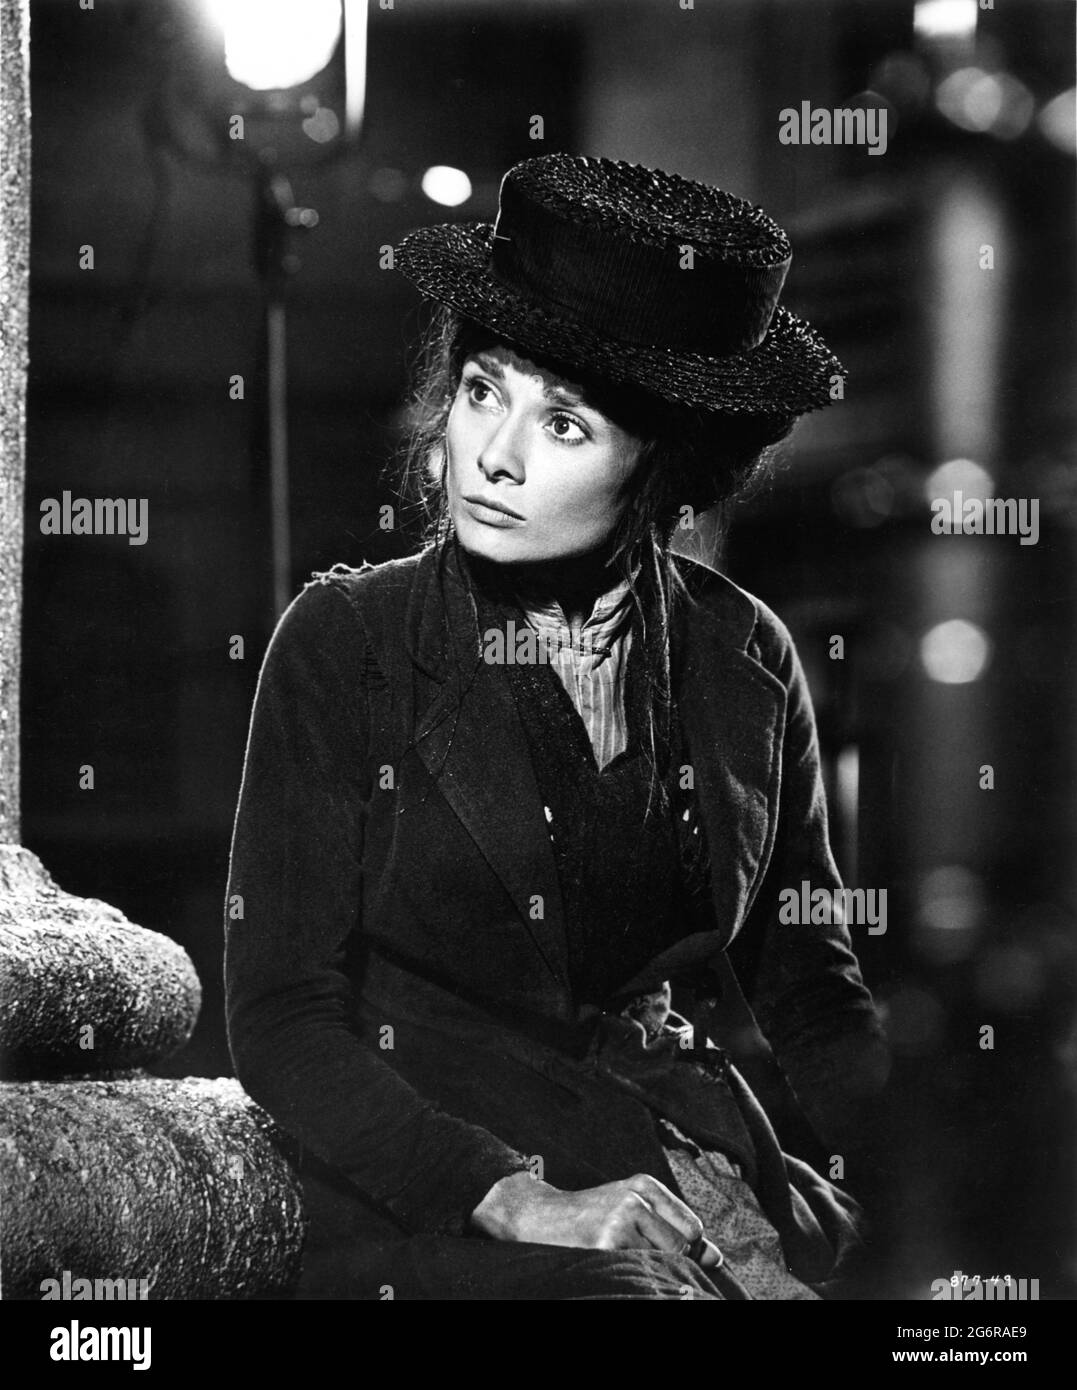 AUDREY HEPBURN on set candid portrait in costume as Eliza Doolittle for Covent Garden scenes during filming of MY FAIR LADY 1964 director GEORGE CUKOR from the Broadway musical adapted from the play Pygmalion by George Bernard Shaw screenplay book and lyrics Alan Jay Lerner  music Frederick Loewe production design and costumes Cecil Beaton producer Jack L.Warner Warner Bros. Stock Photo